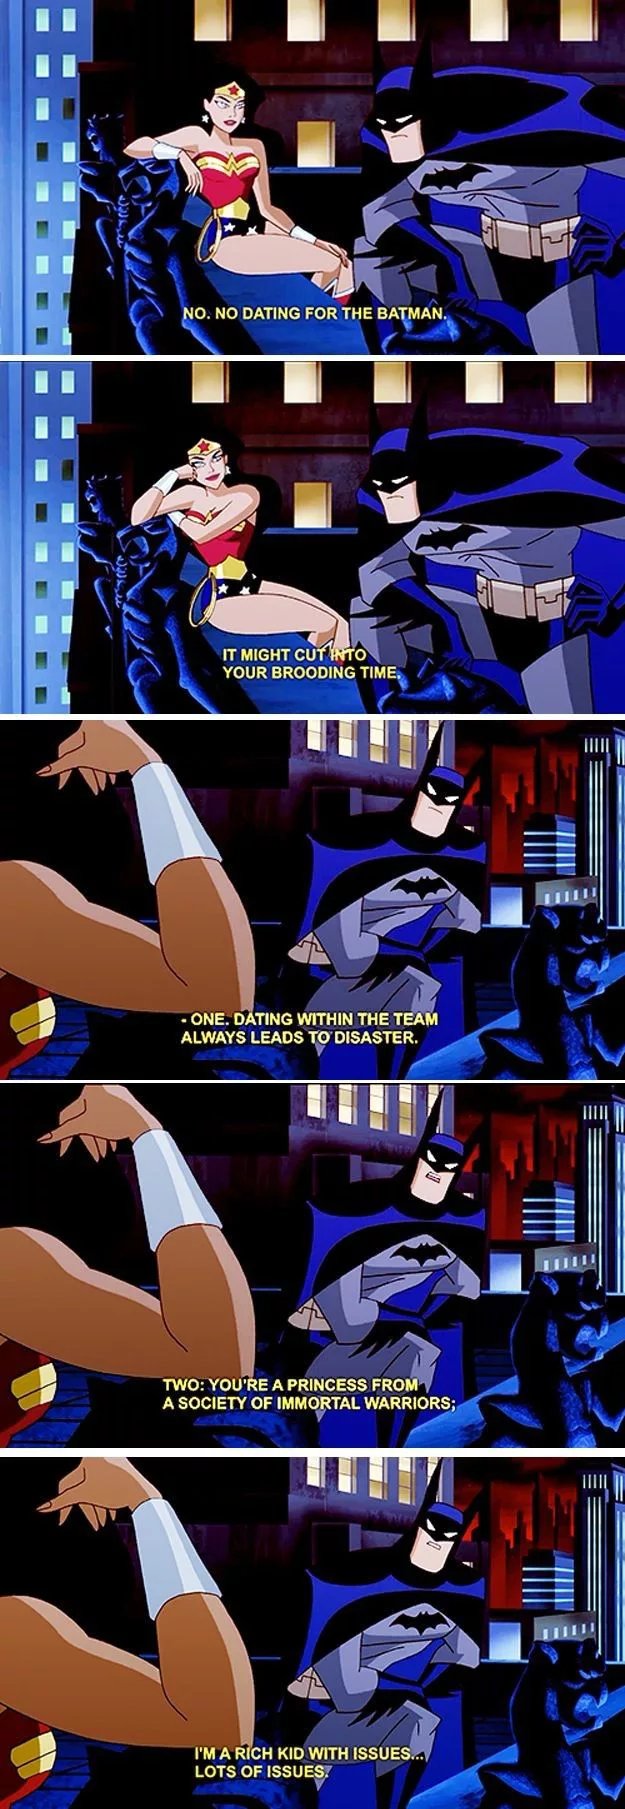 No+dating+for+the+batman